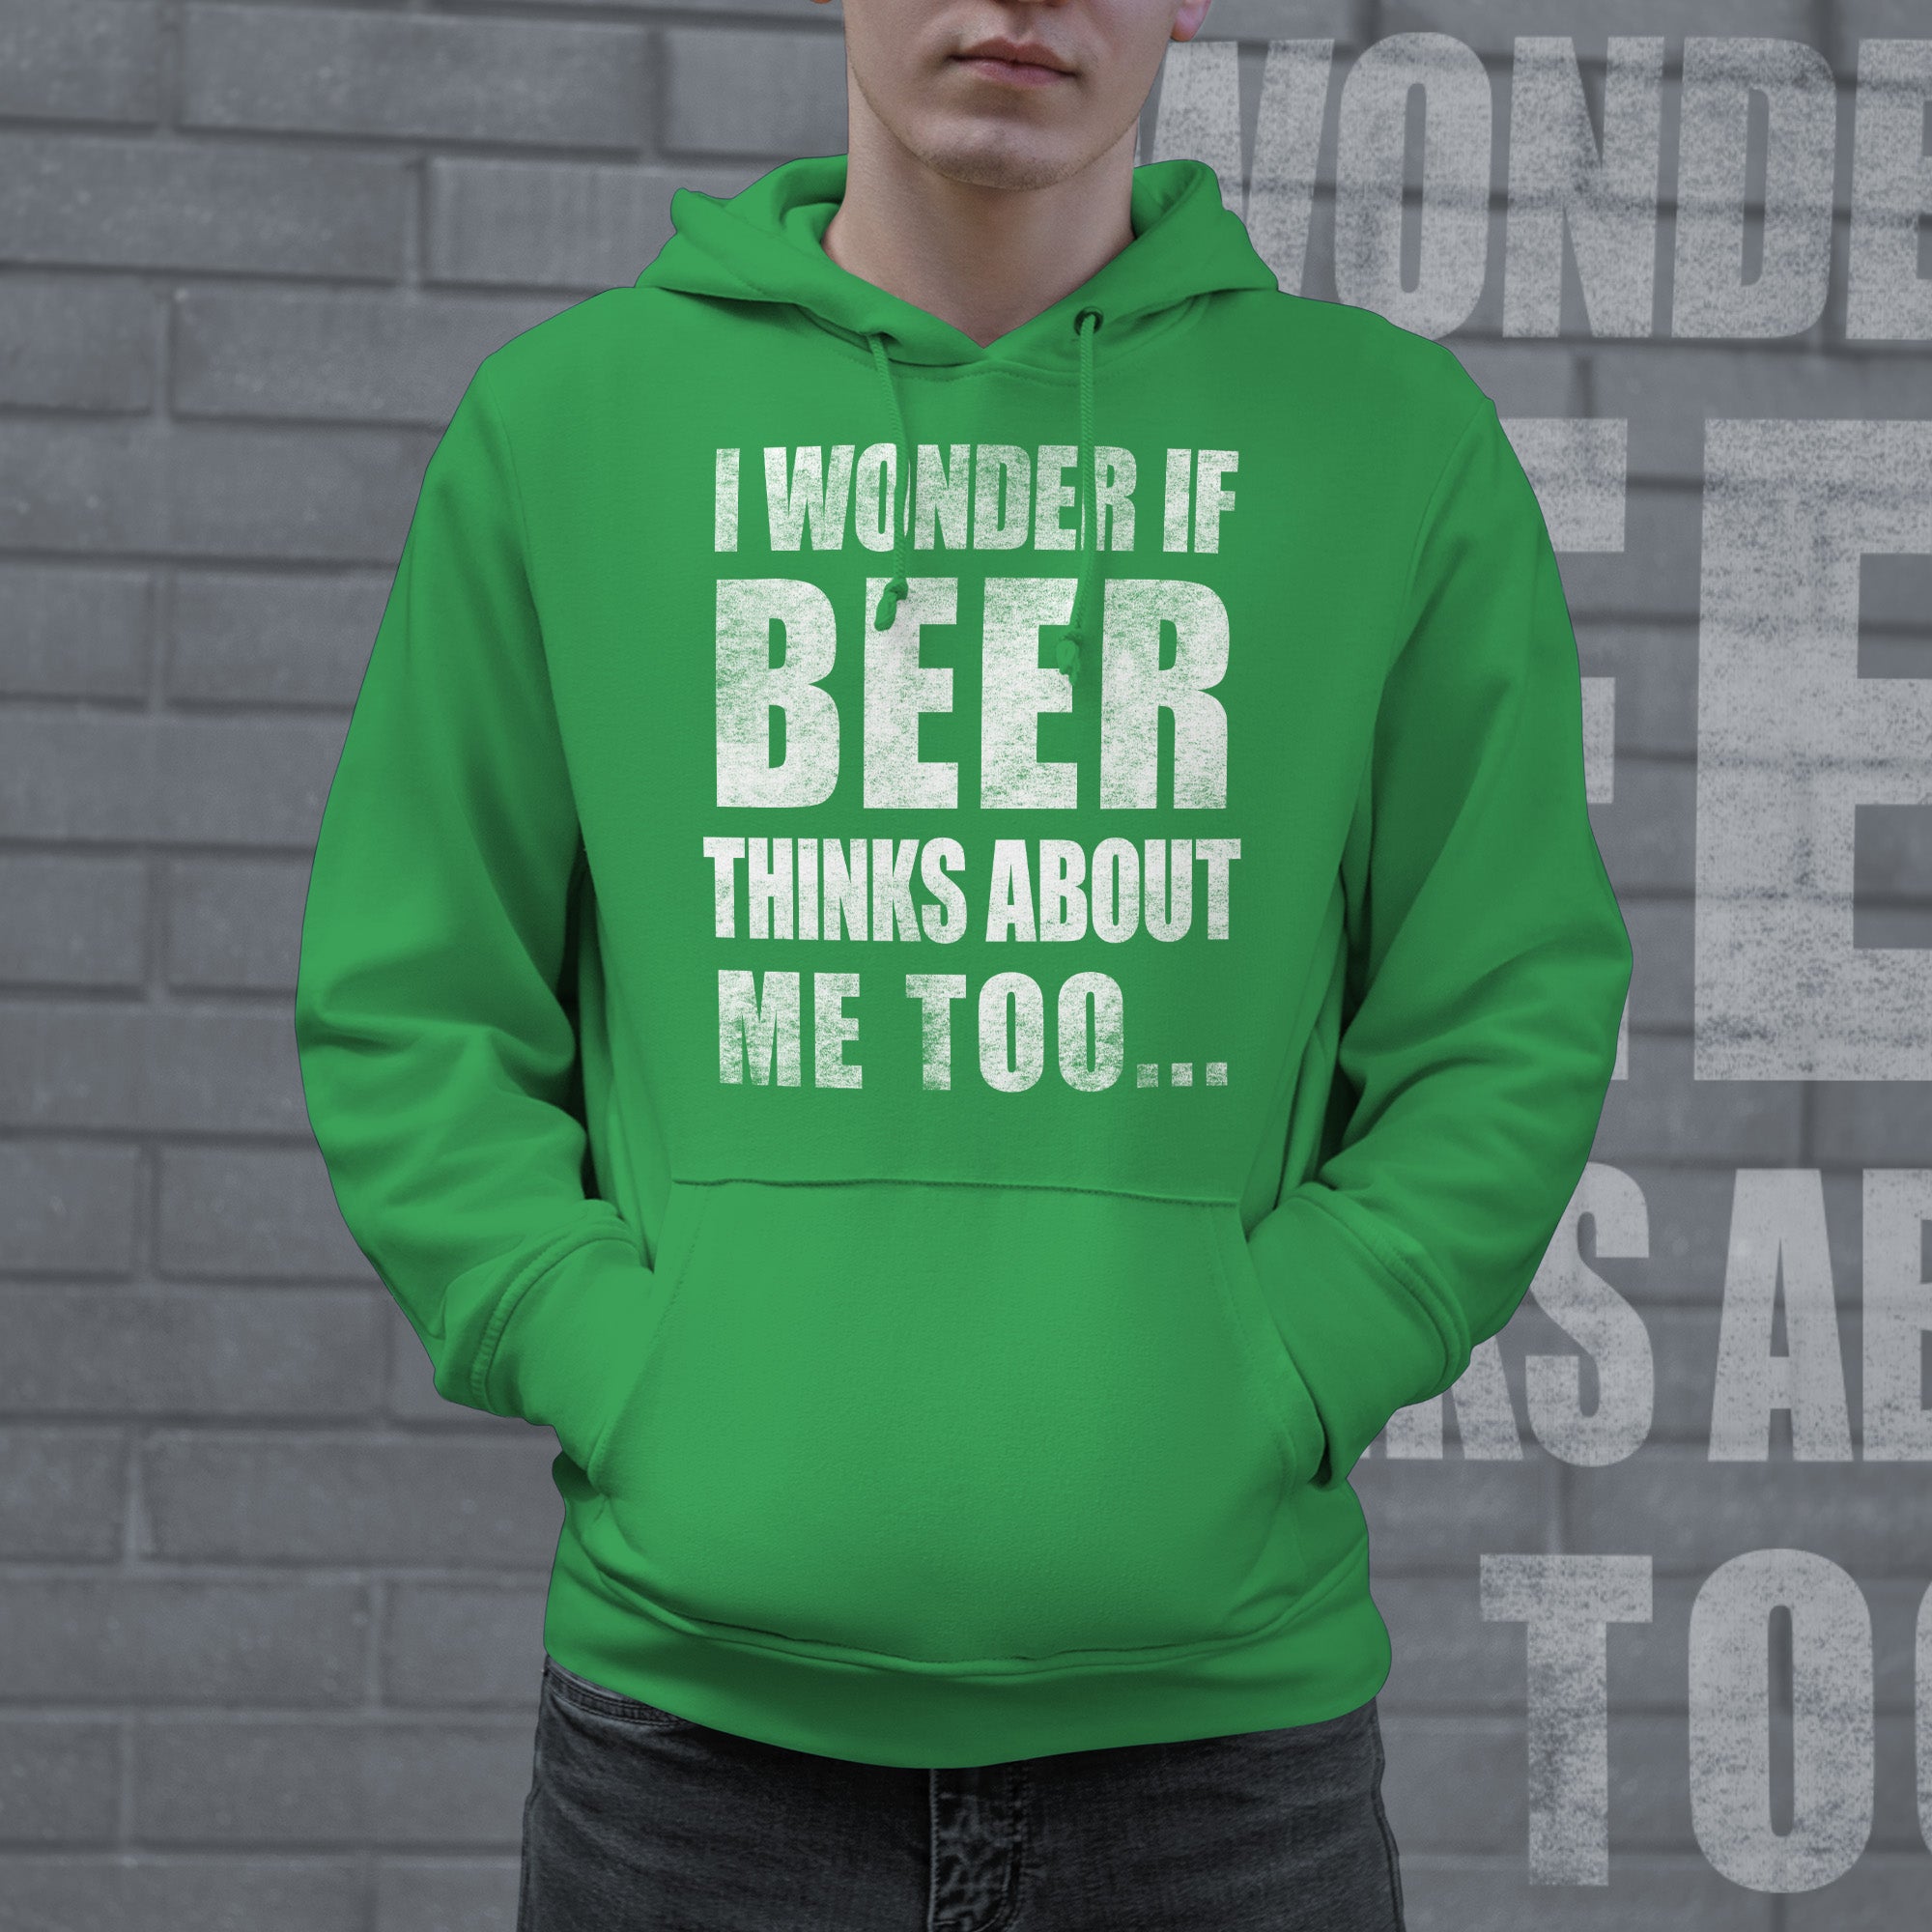 Funny Green I Wonder If Beer Thinks About Me Too Hoodie Nerdy Saint Patrick's Day Drinking Tee